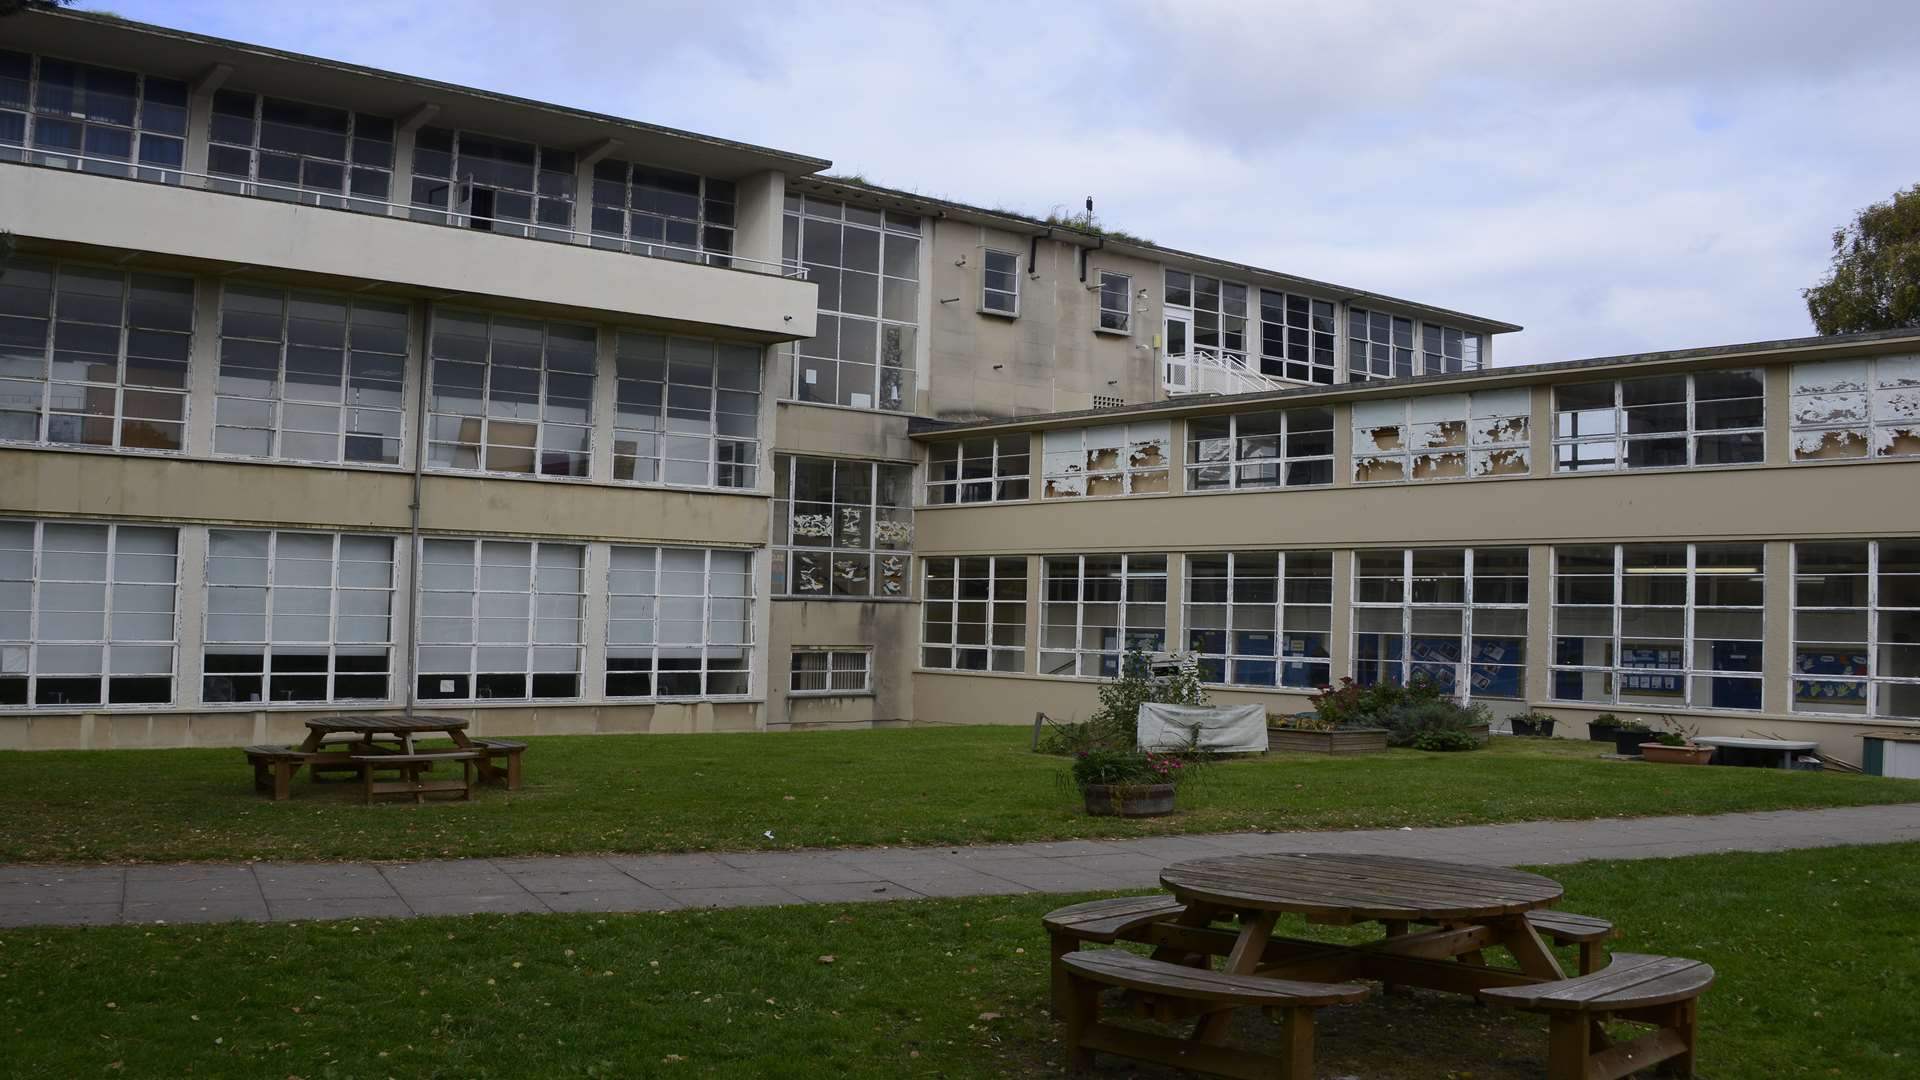 The main building will be demolished and replaced with a new school